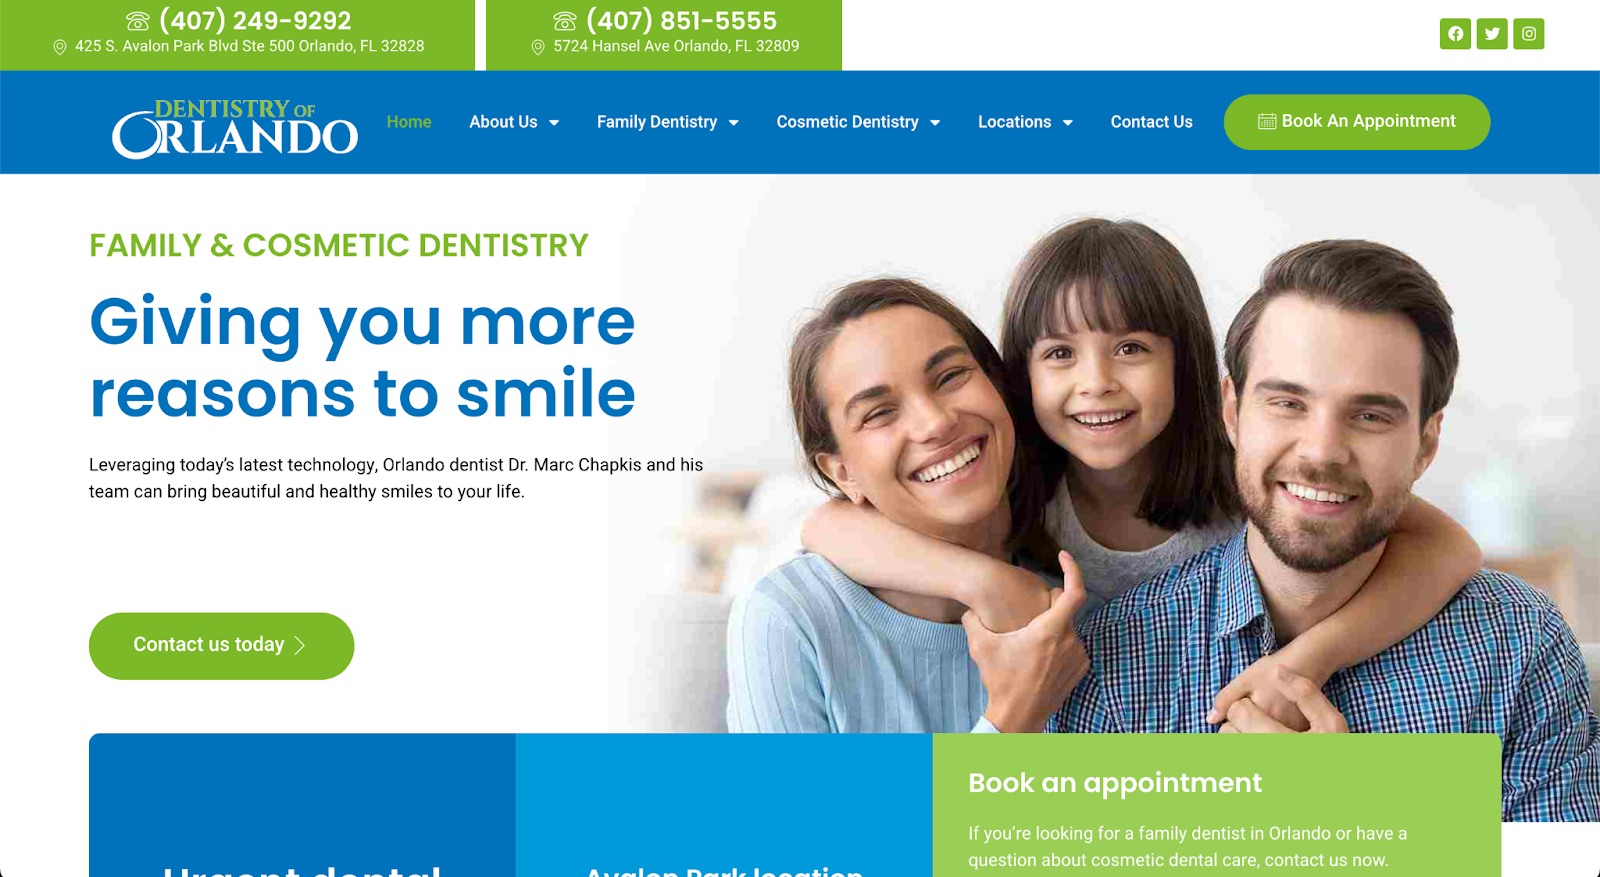 Lots to smile about when you check out the Dentistry of Orlando’s website for dental website inspiration